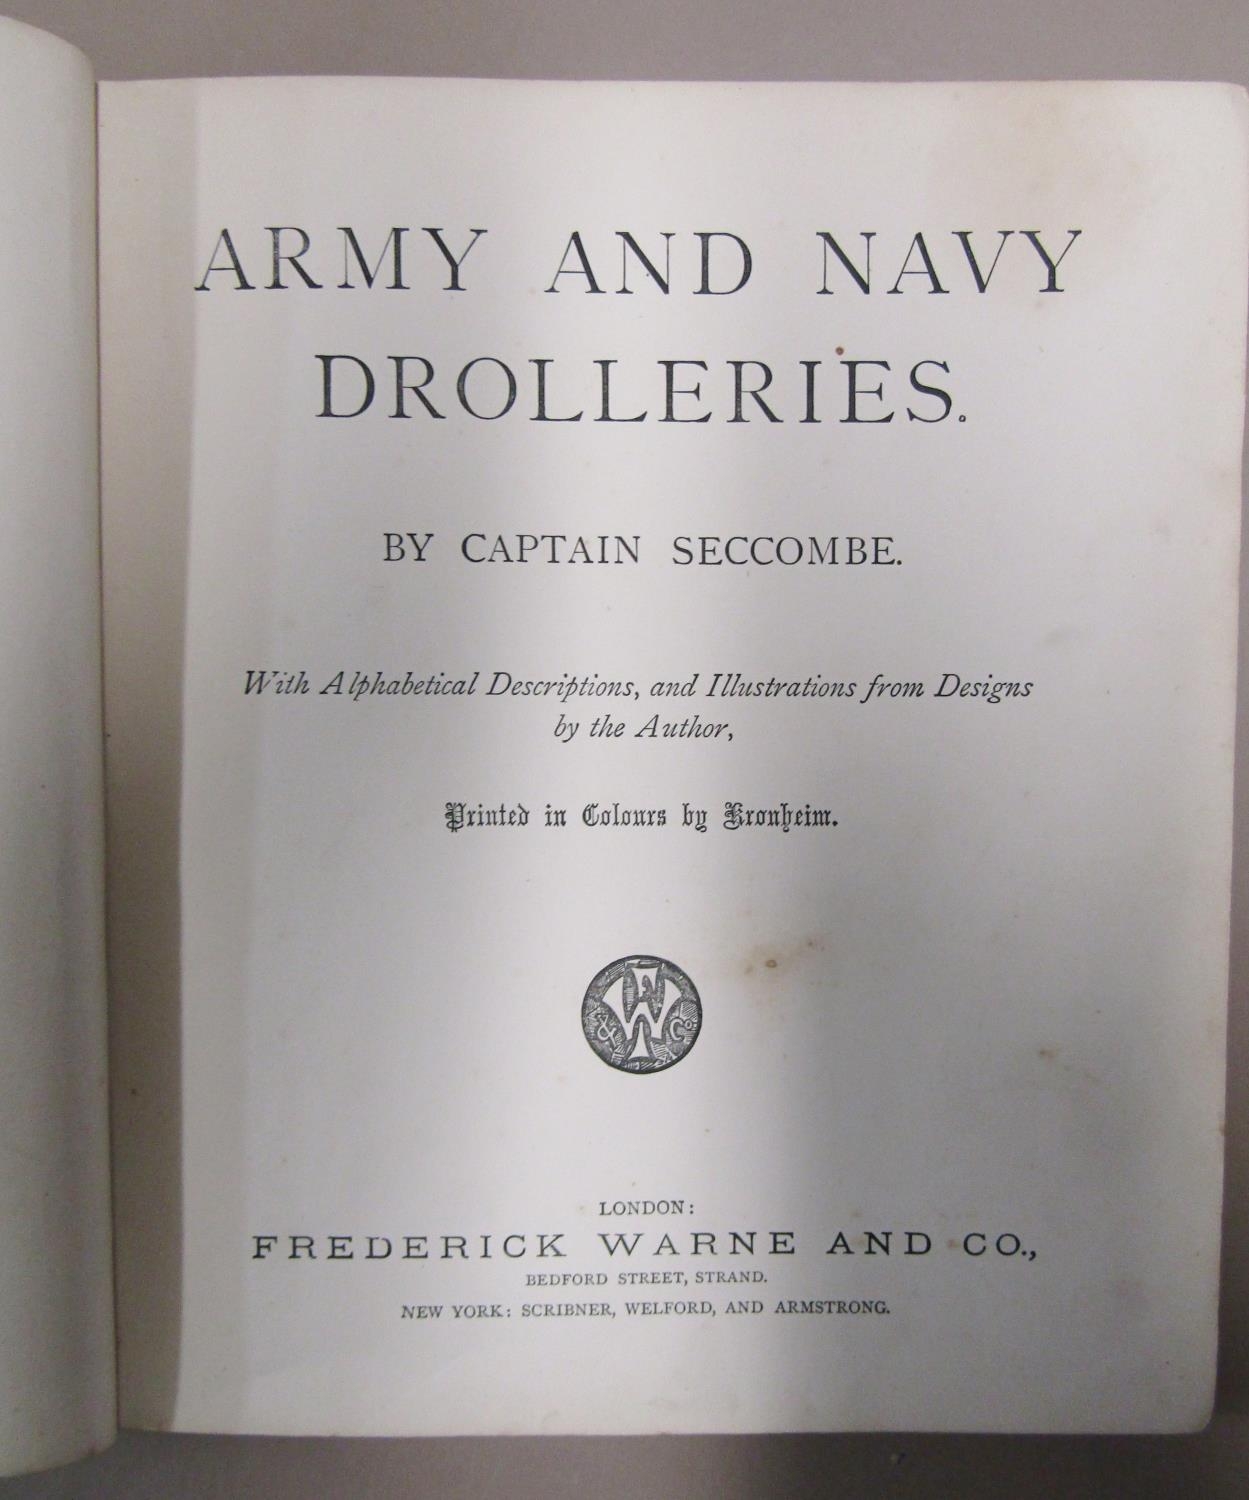 Army & Navy Drolleries by Captain Seccombe circa 1890, humorous coloured illustrations - Image 2 of 3